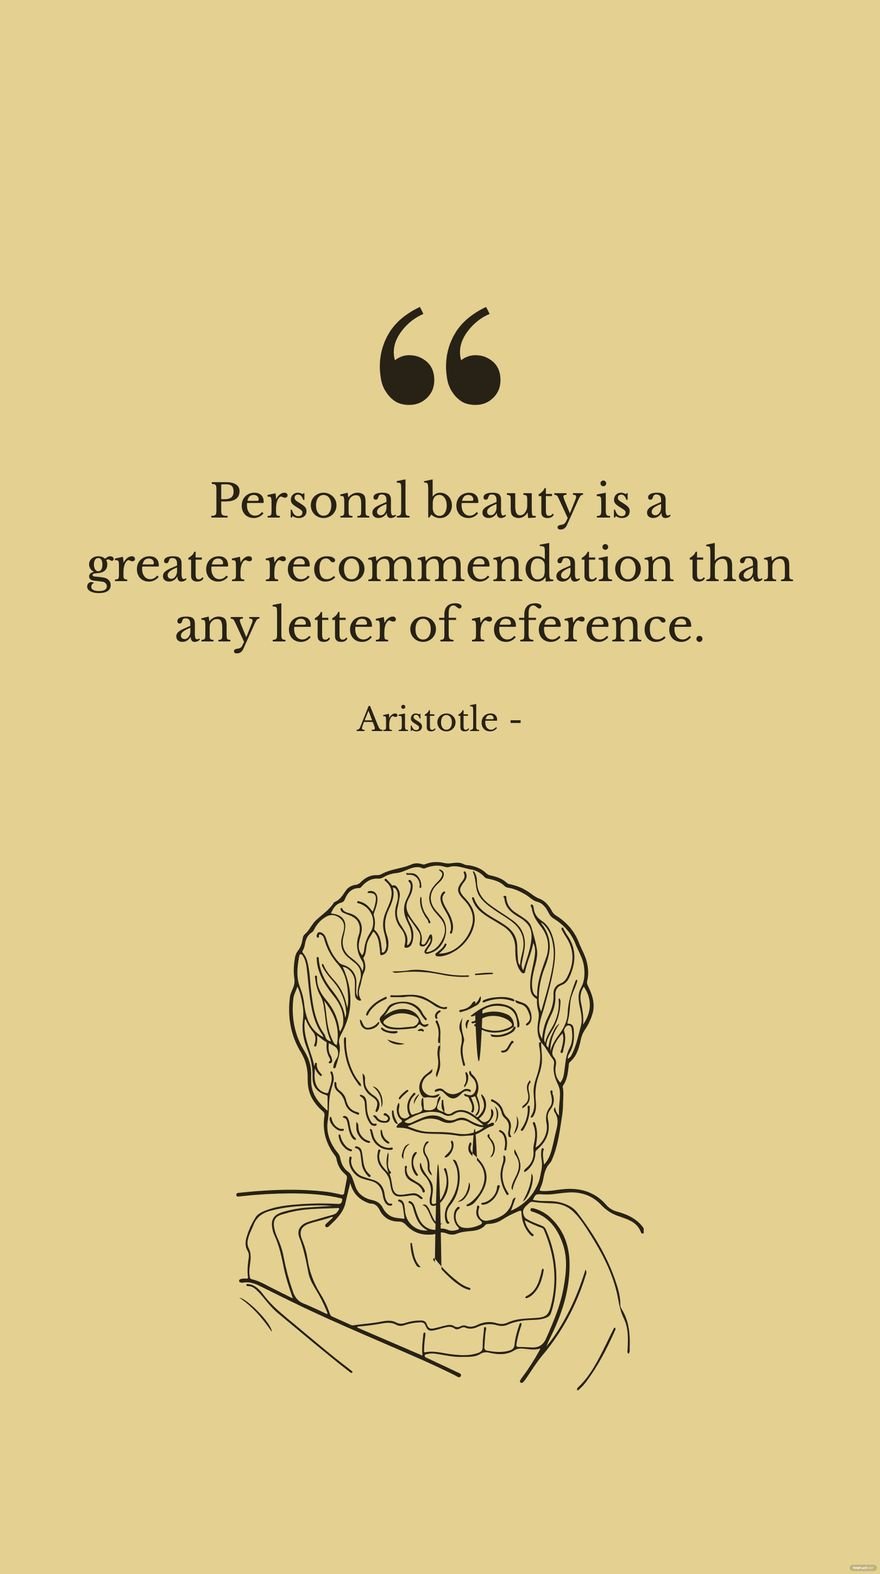 Free Aristotle - Personal beauty is a greater recommendation than any letter of reference. in JPG